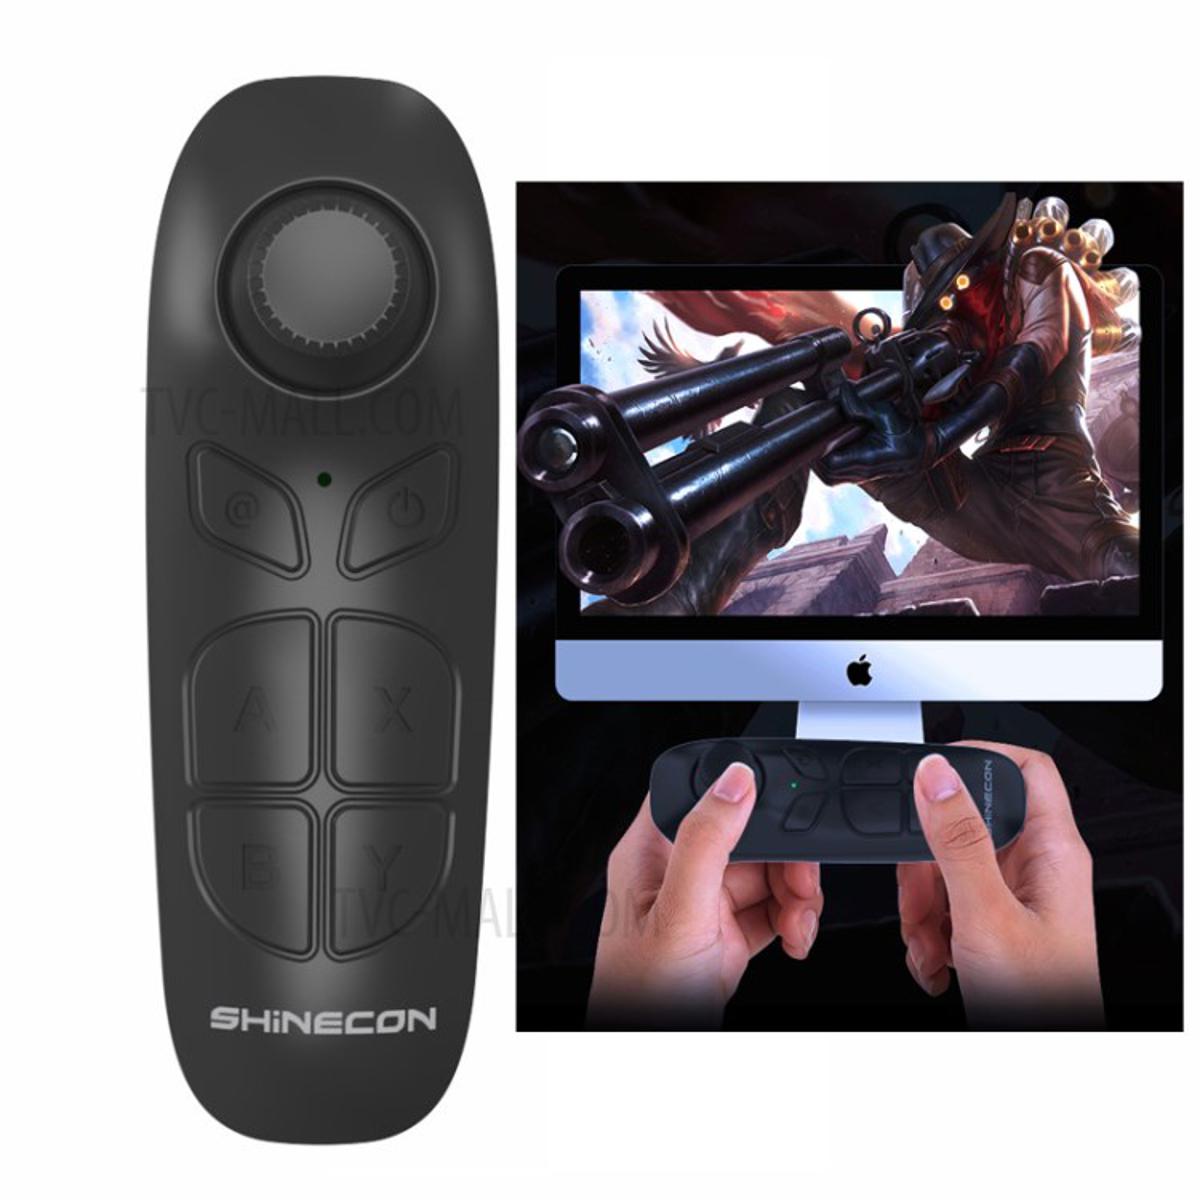 VR Shinecon Portable Wireless Remote Controller SC-B03 Bluetooth Game  Joystick Multi-Function Gamepads for Android Smartphones & iOS iPhone 